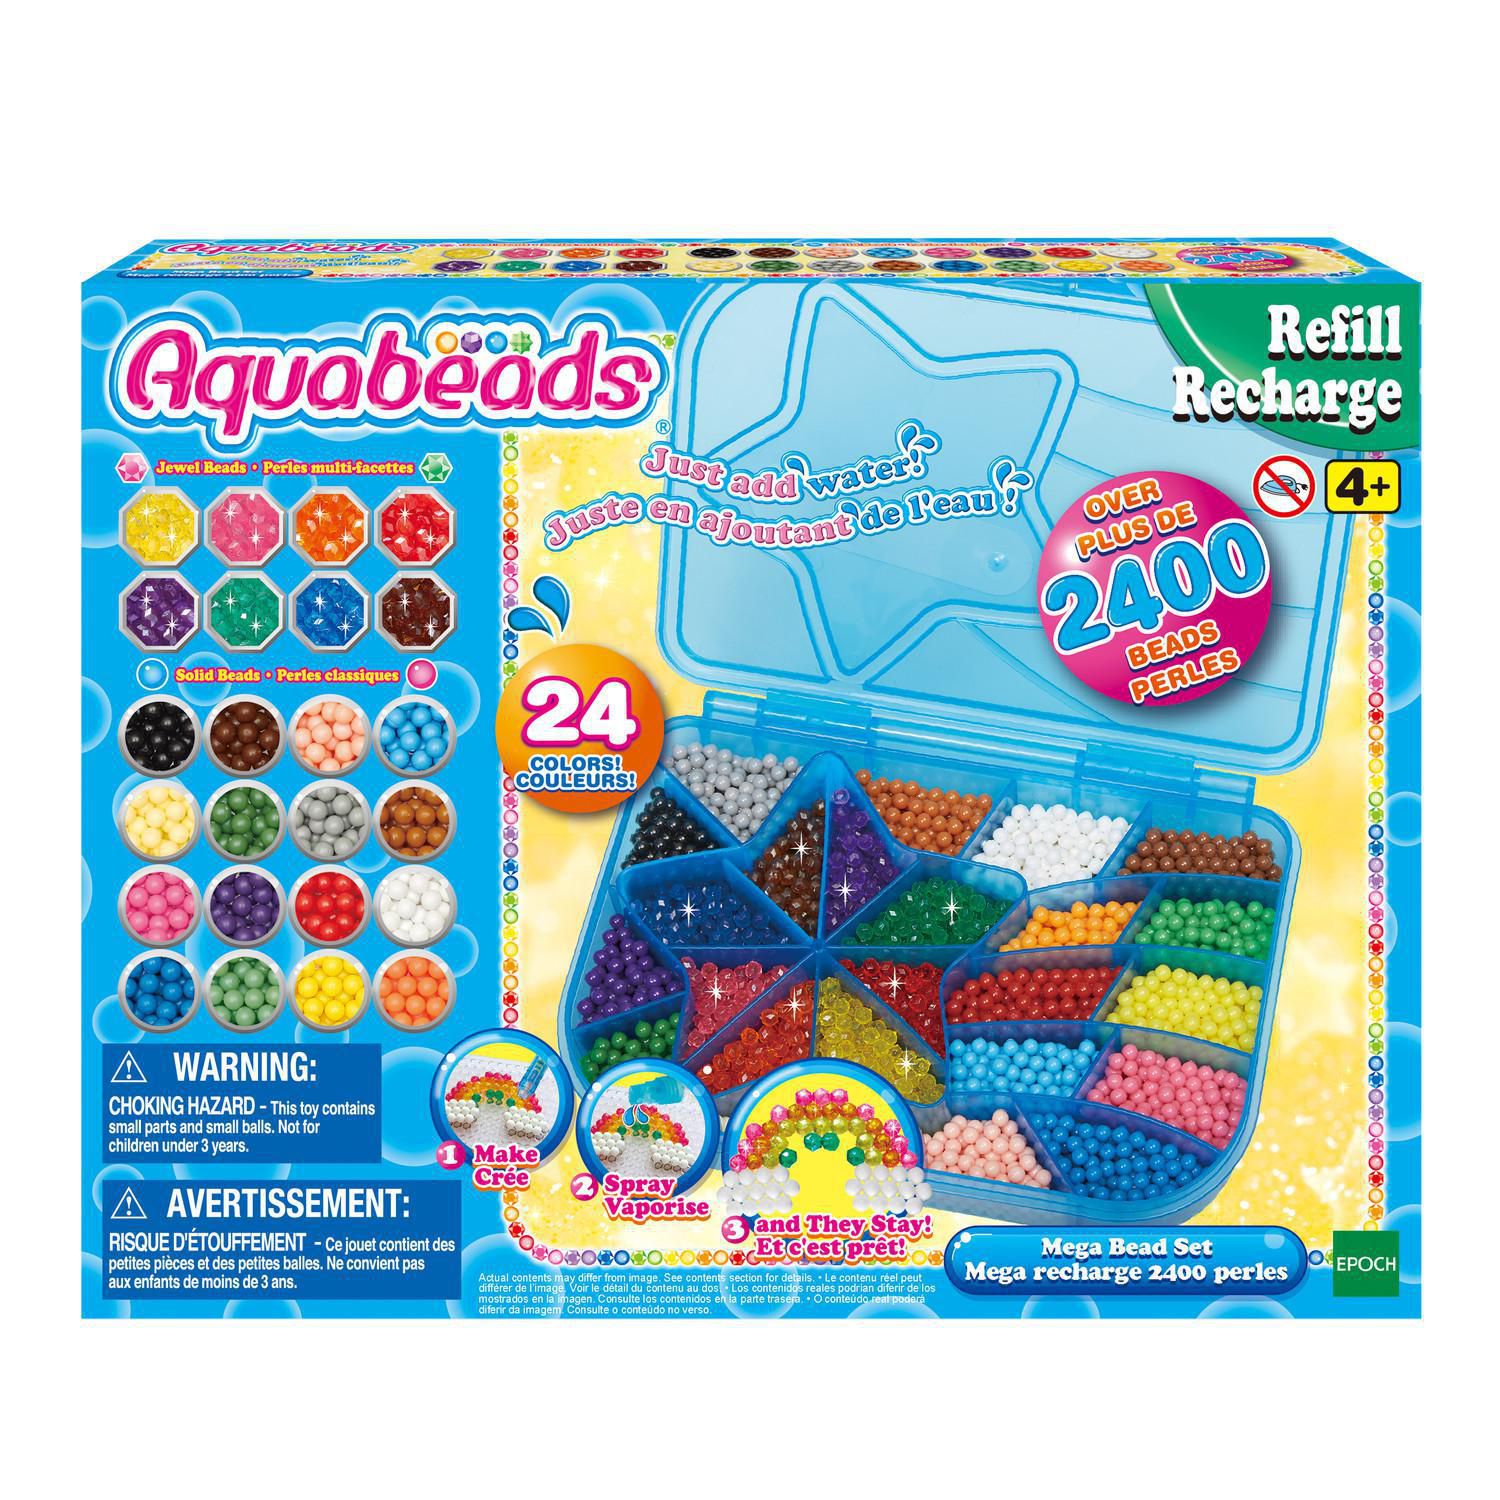 Aquabeads Star Bead Refill Pack, Arts & Crafts Bead Refill Kit for Children  - Over 800 Star Beads in 8 Colors